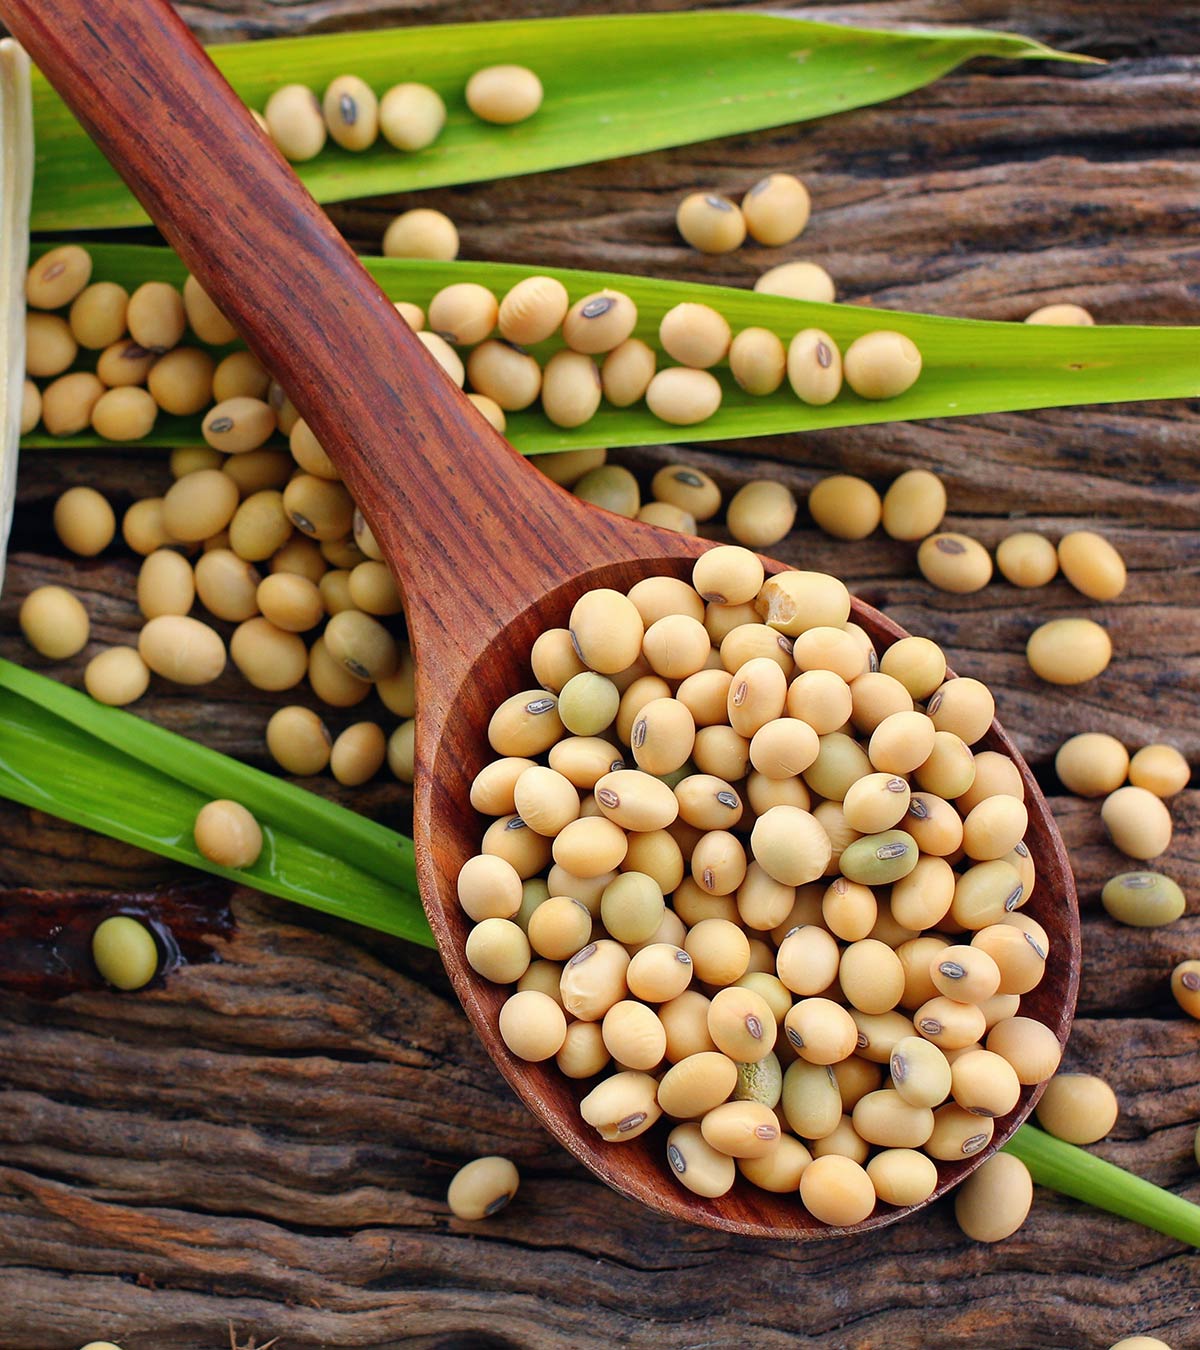 Is It Safe To Eat Soybeans During Pregnancy?